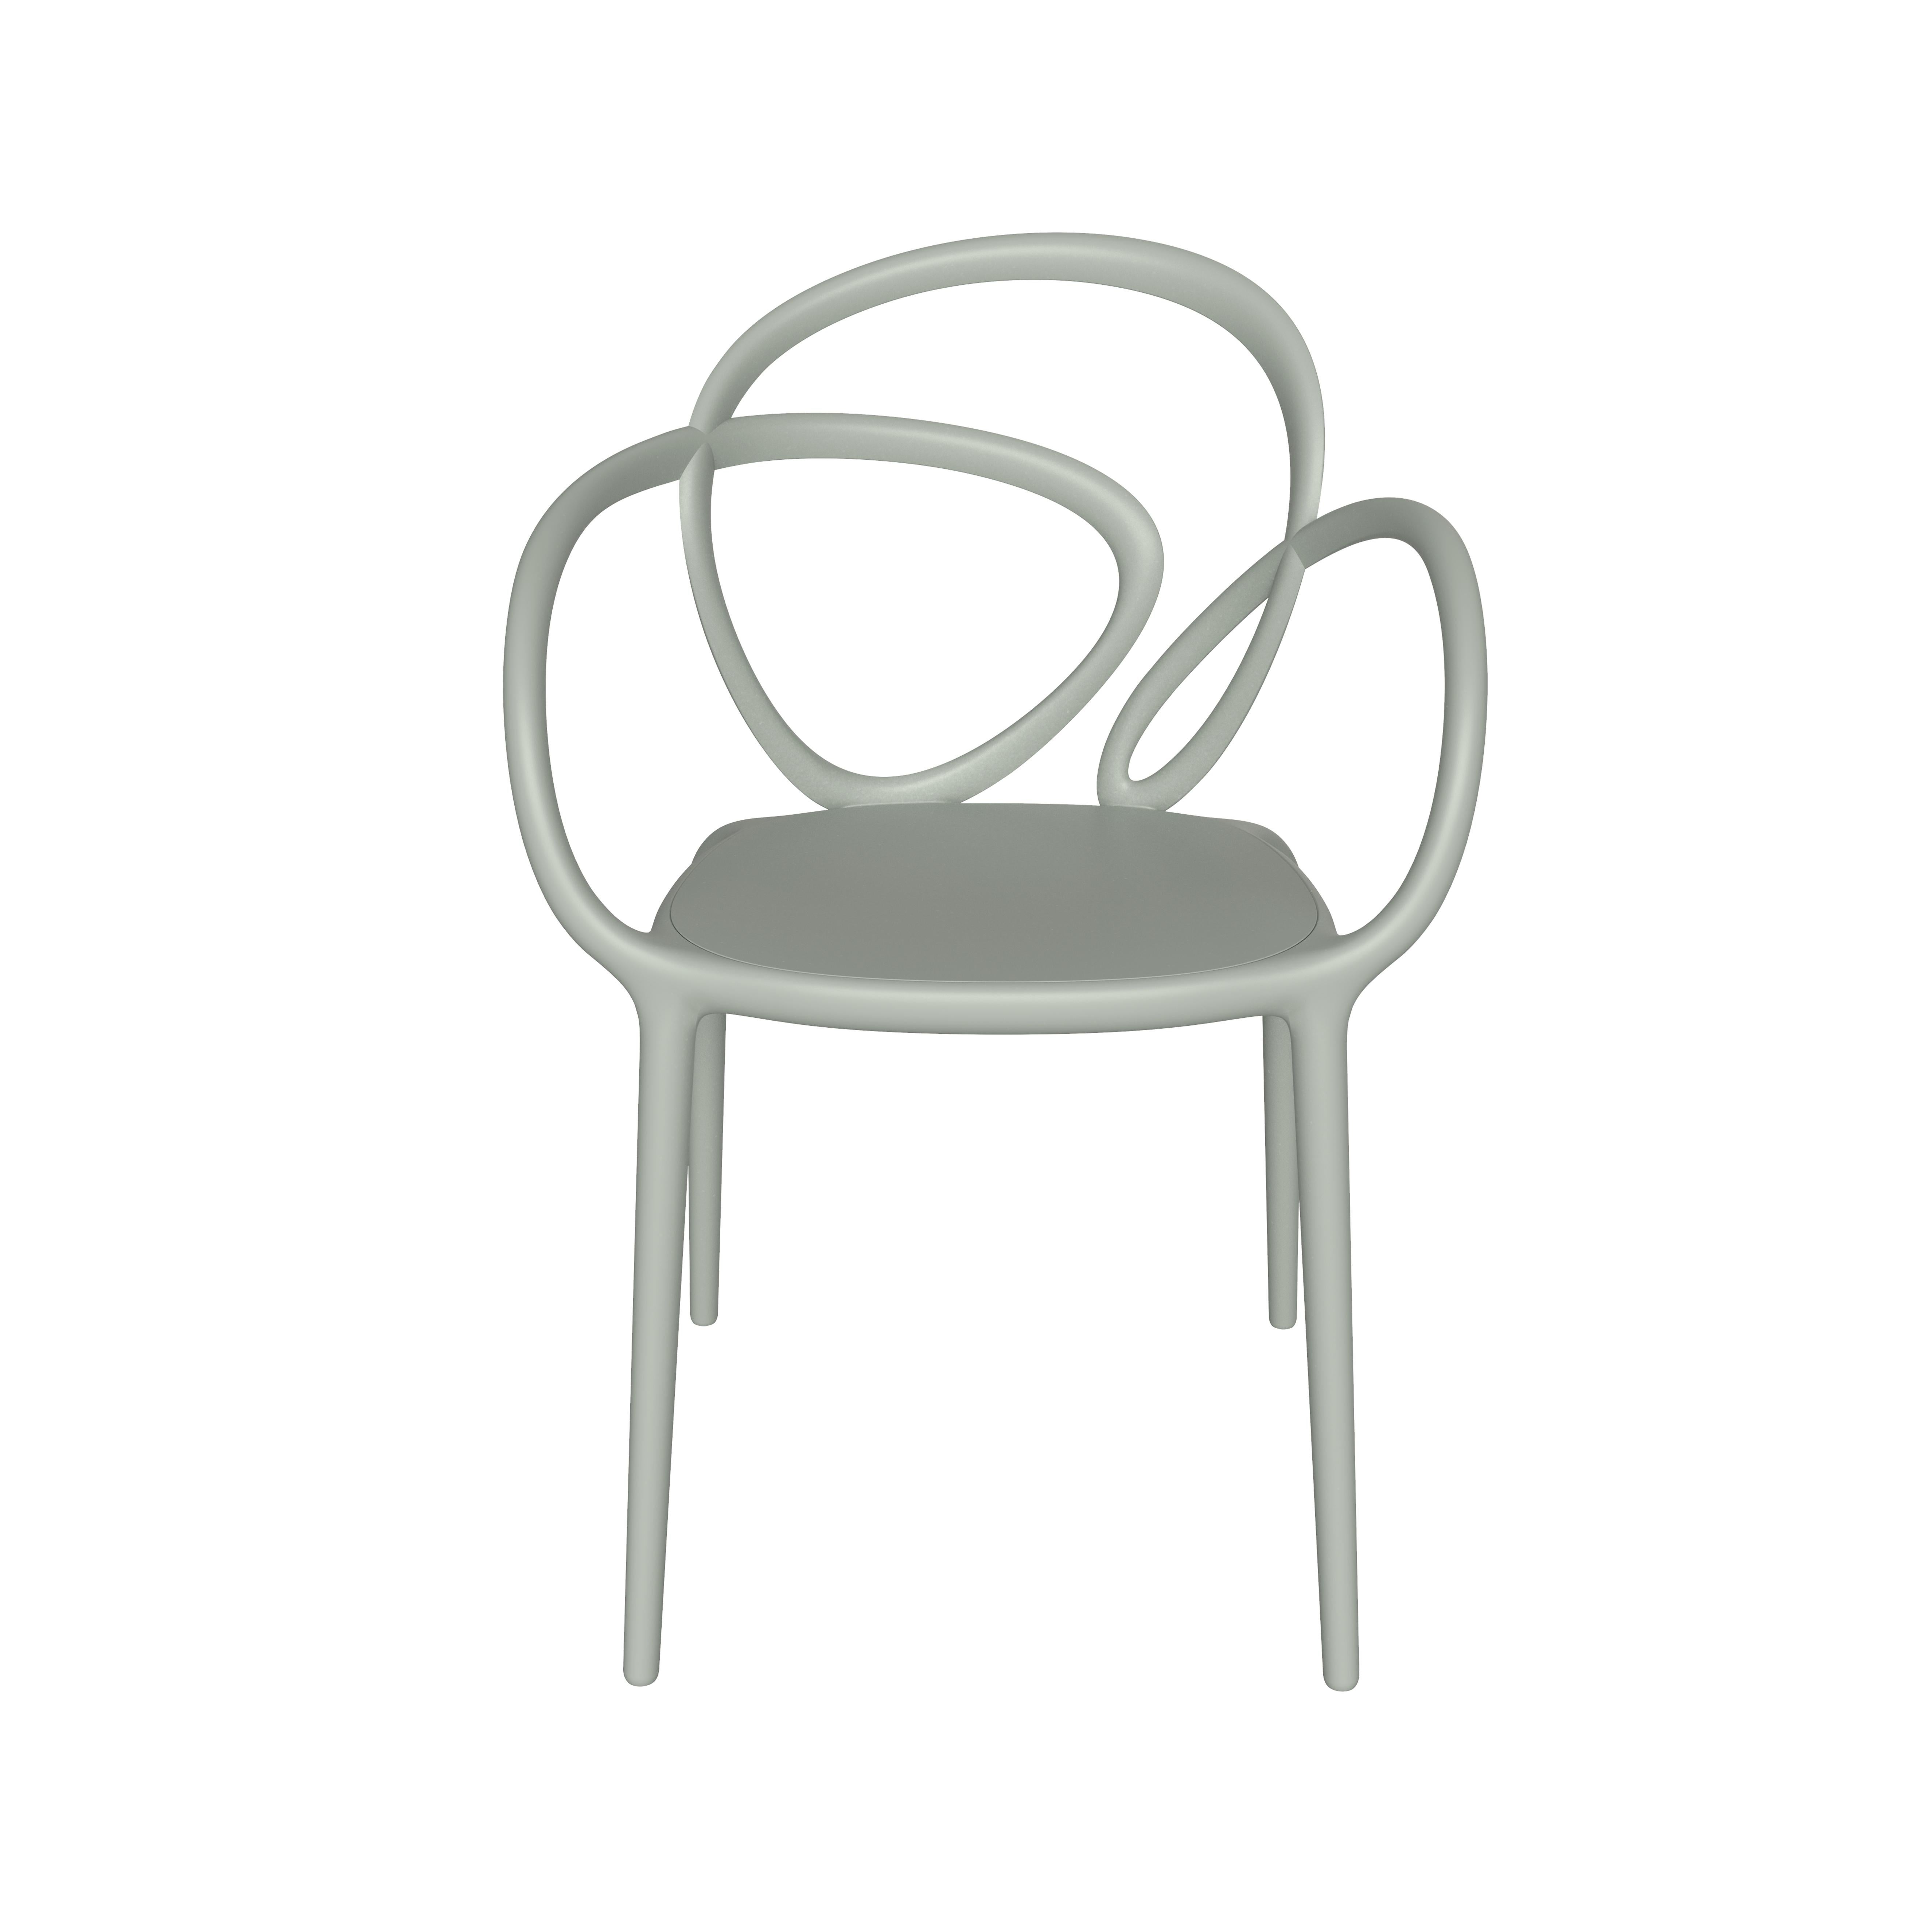 For Sale: Beige Modern Black Green Beige or White Nordic Loop Dining or Accent Chair Set of 2